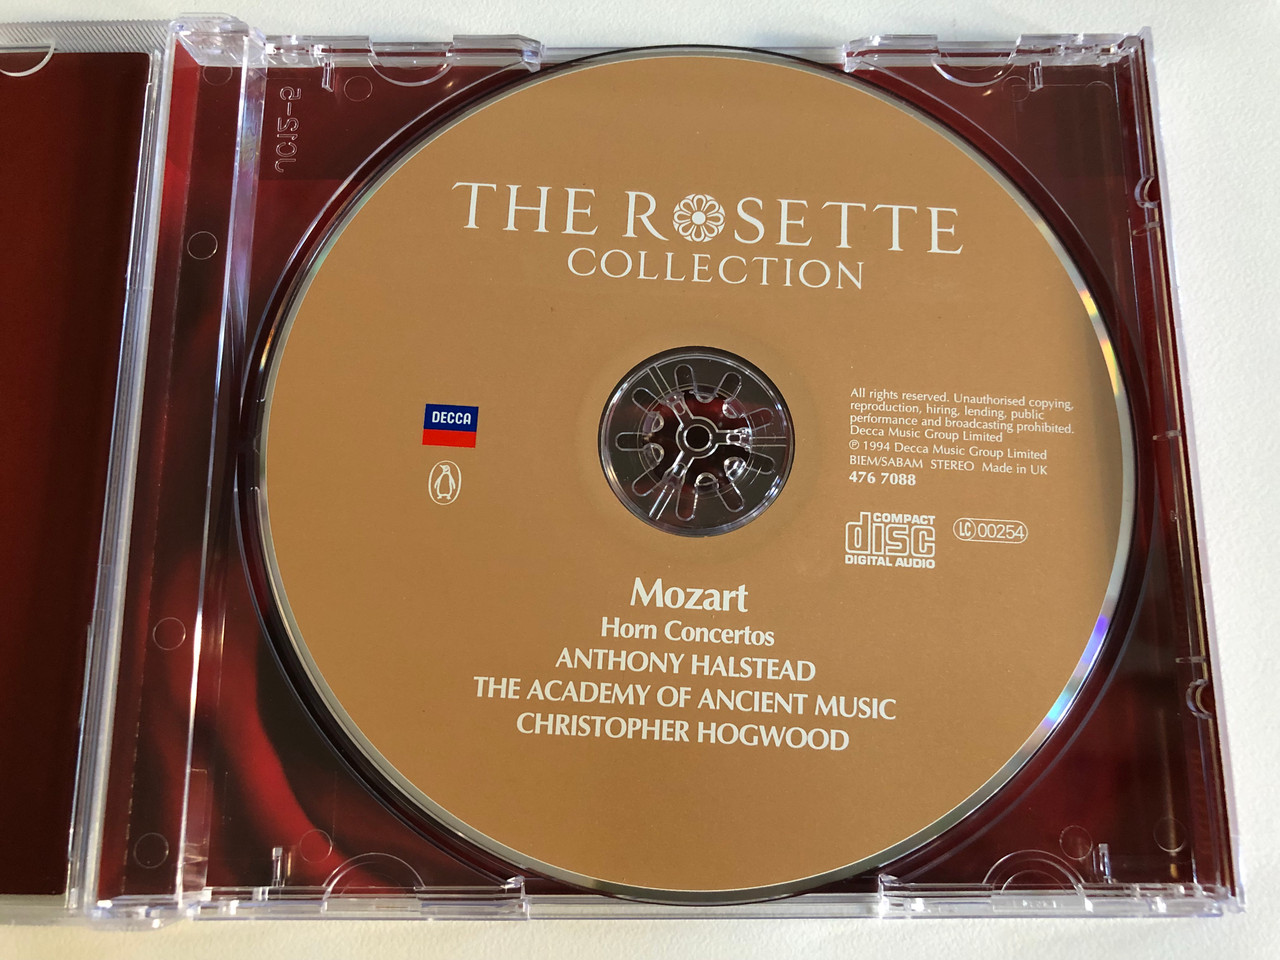 https://cdn10.bigcommerce.com/s-62bdpkt7pb/products/0/images/193379/The_Rosette_Collection_Mozart_The_Horn_Concertos_Anthony_Halstead_The_Academy_Of_Ancient_Music_Christopher_Hogwood_A_Rosette_Recording_-_The_Penguin_Guide_To_Compact_Discs_Decca_Audi_3__90708.1632932927.1280.1280.JPG?c=2&_gl=1*kkd3ev*_ga*MjA2NTIxMjE2MC4xNTkwNTEyNTMy*_ga_WS2VZYPC6G*MTYzMjkyODkwMC4xMDQuMS4xNjMyOTMyODk1LjYw